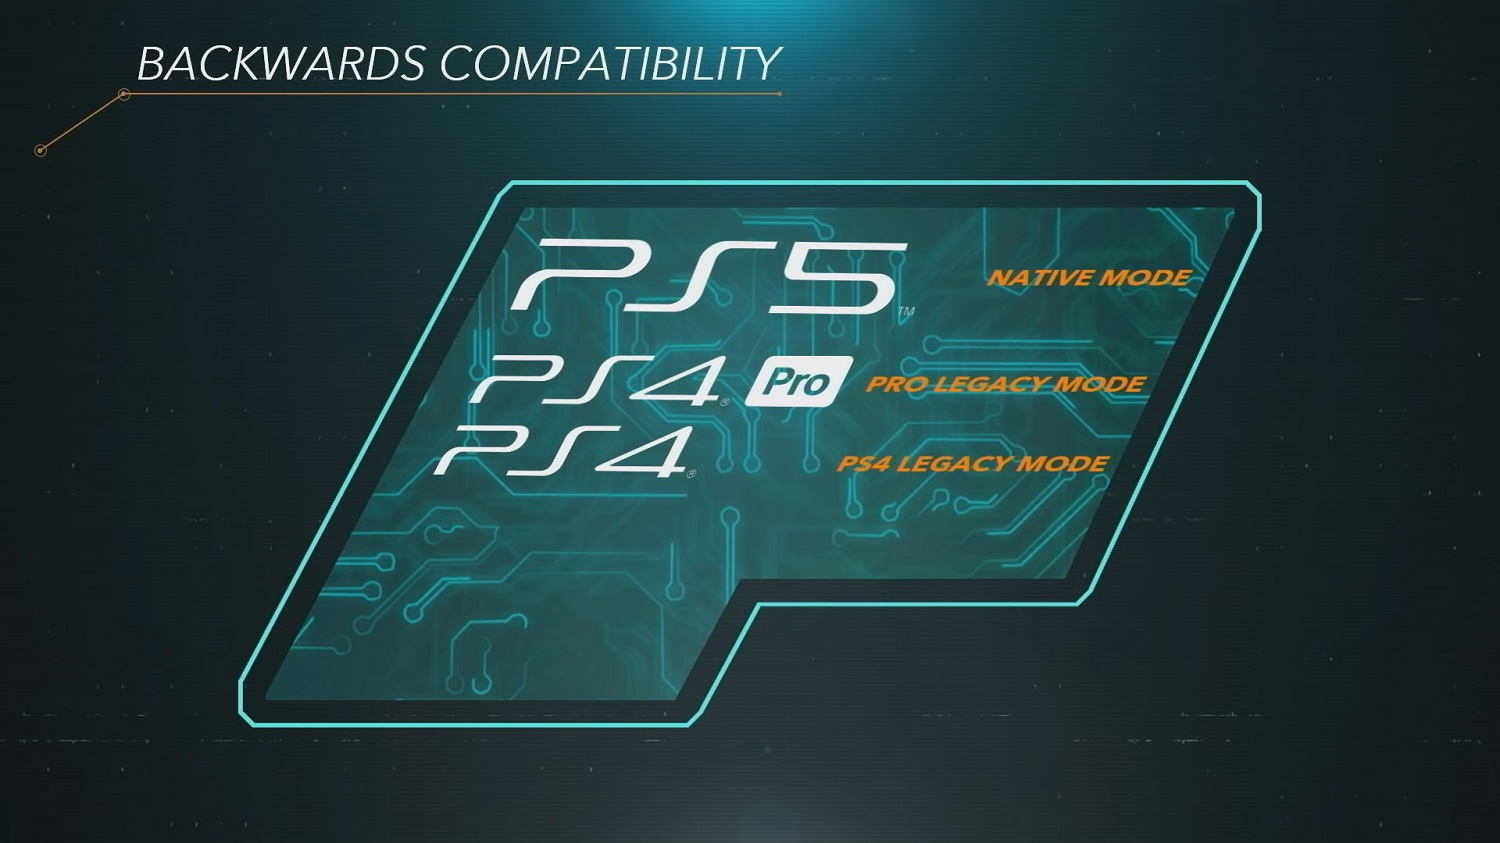 PS4 Pro vs PS5: A Detailed Comparison of Specifications, Features